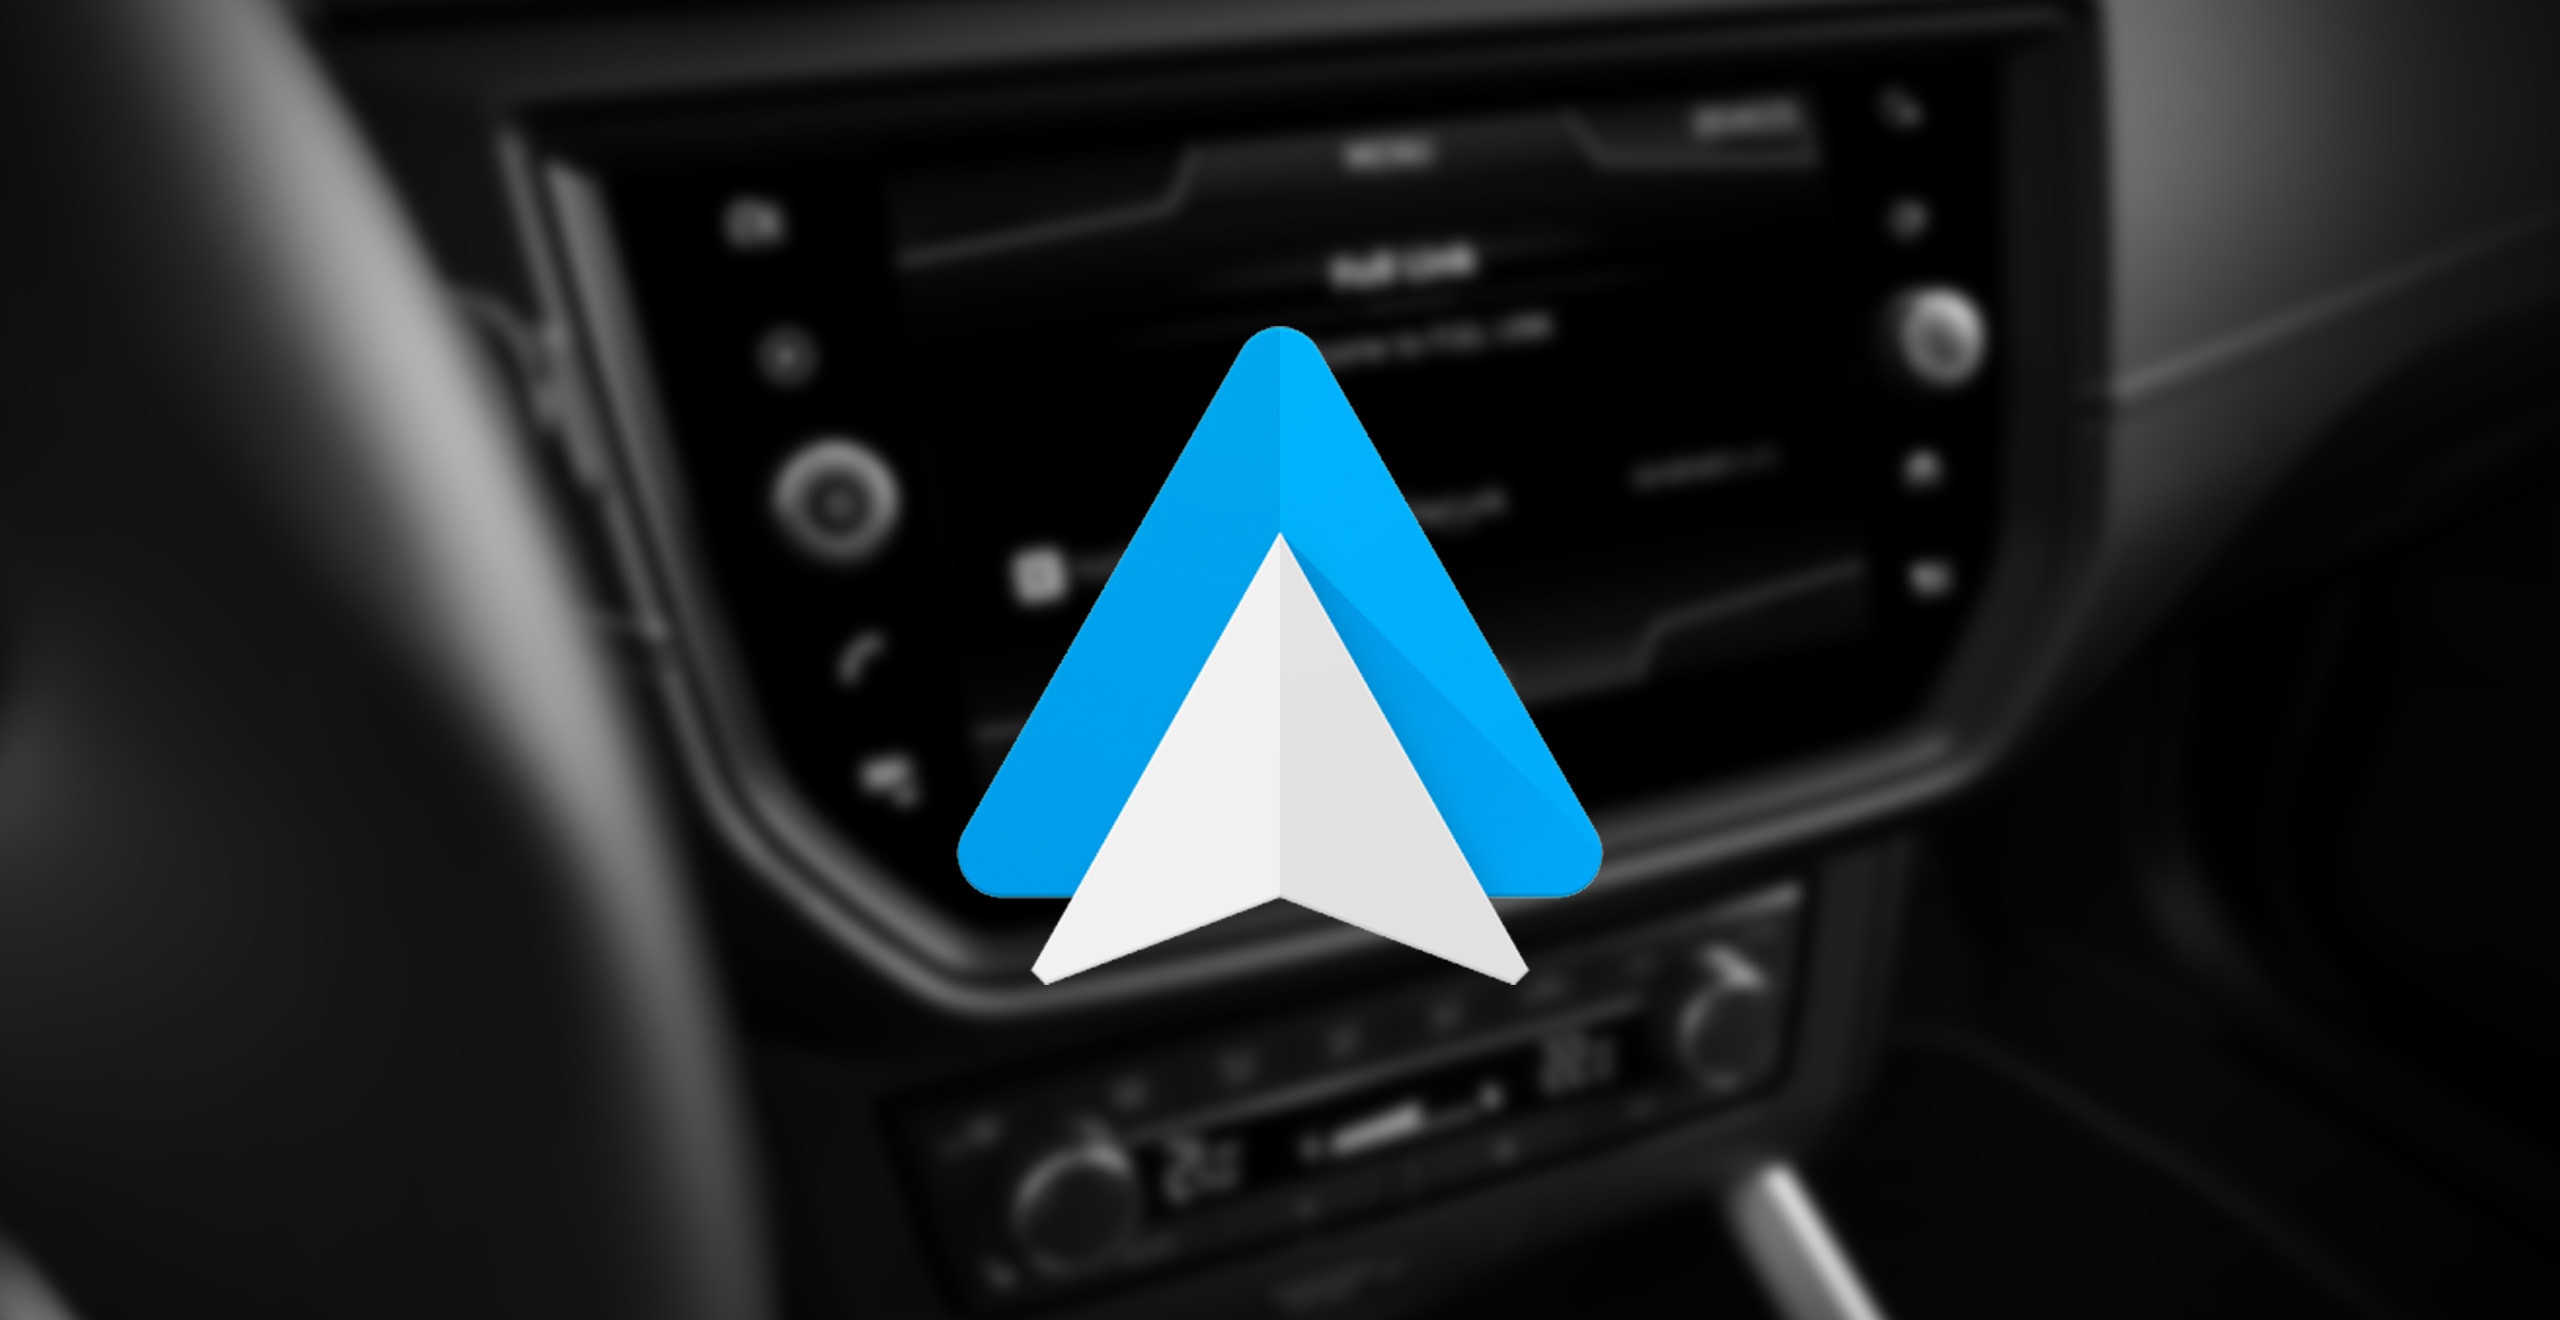 MirrorLink connected car and smartphone. Apps on digital dashboard